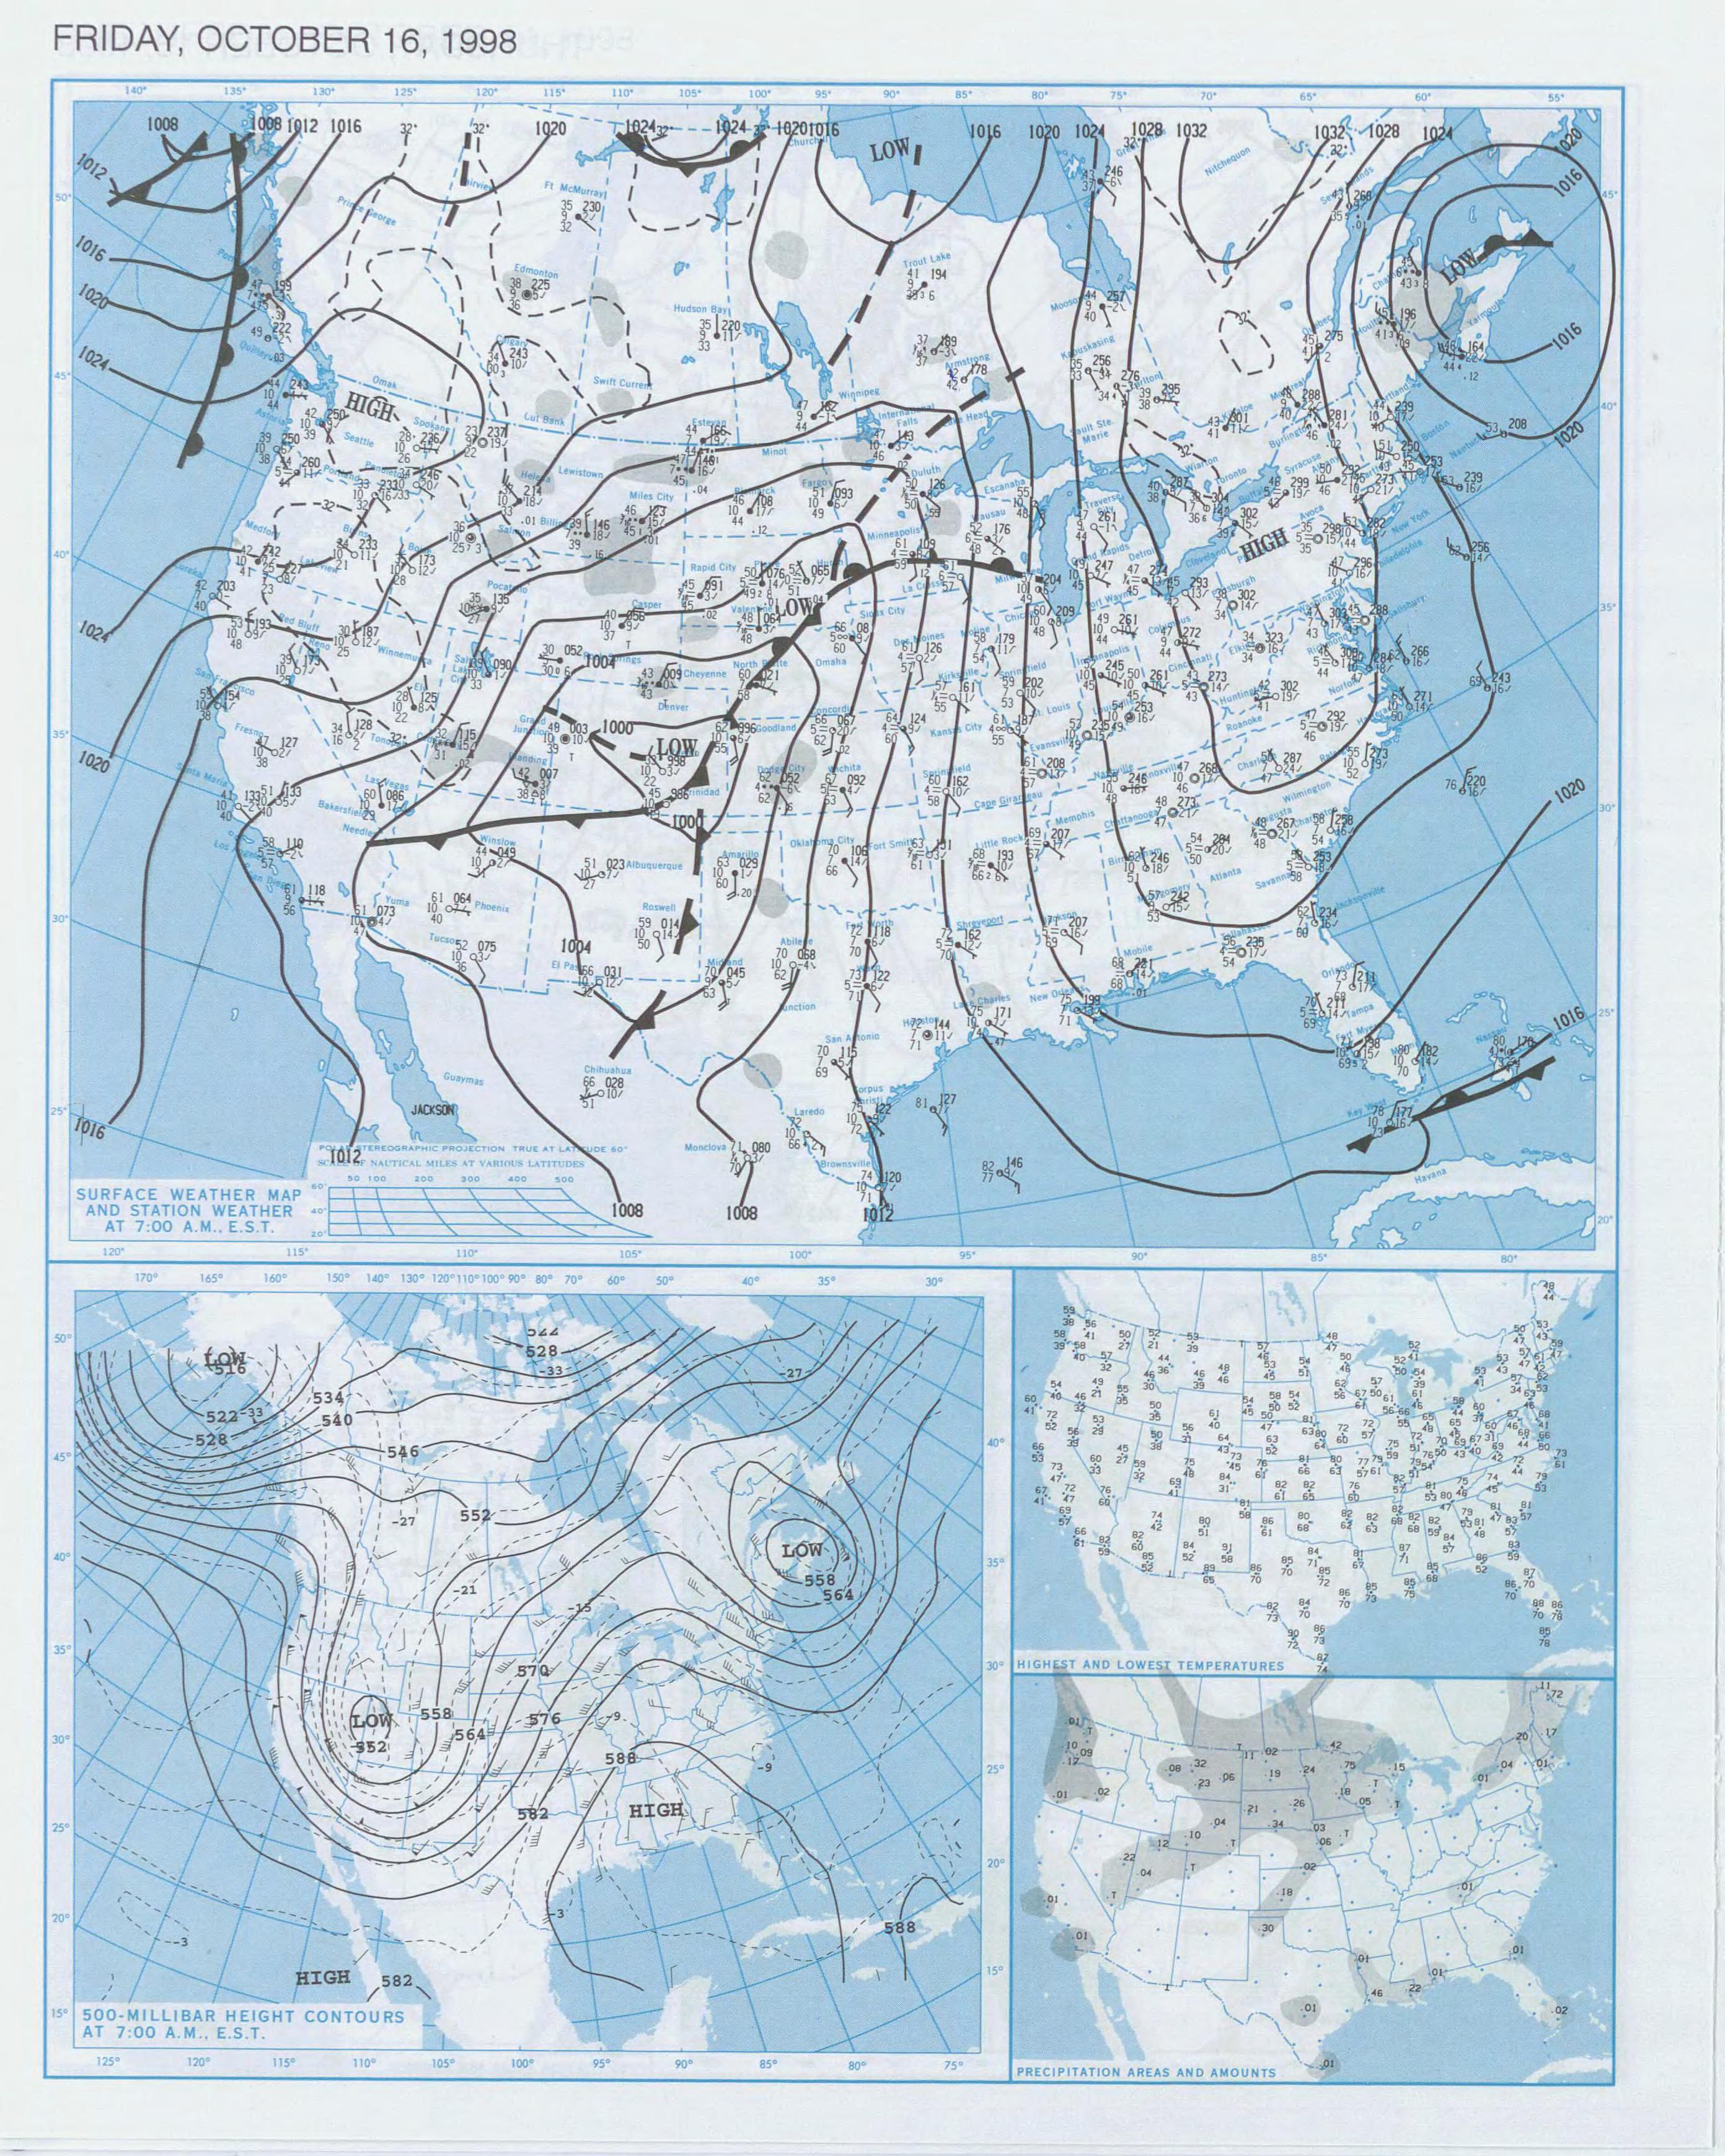 October 16, 1998 Weather Map